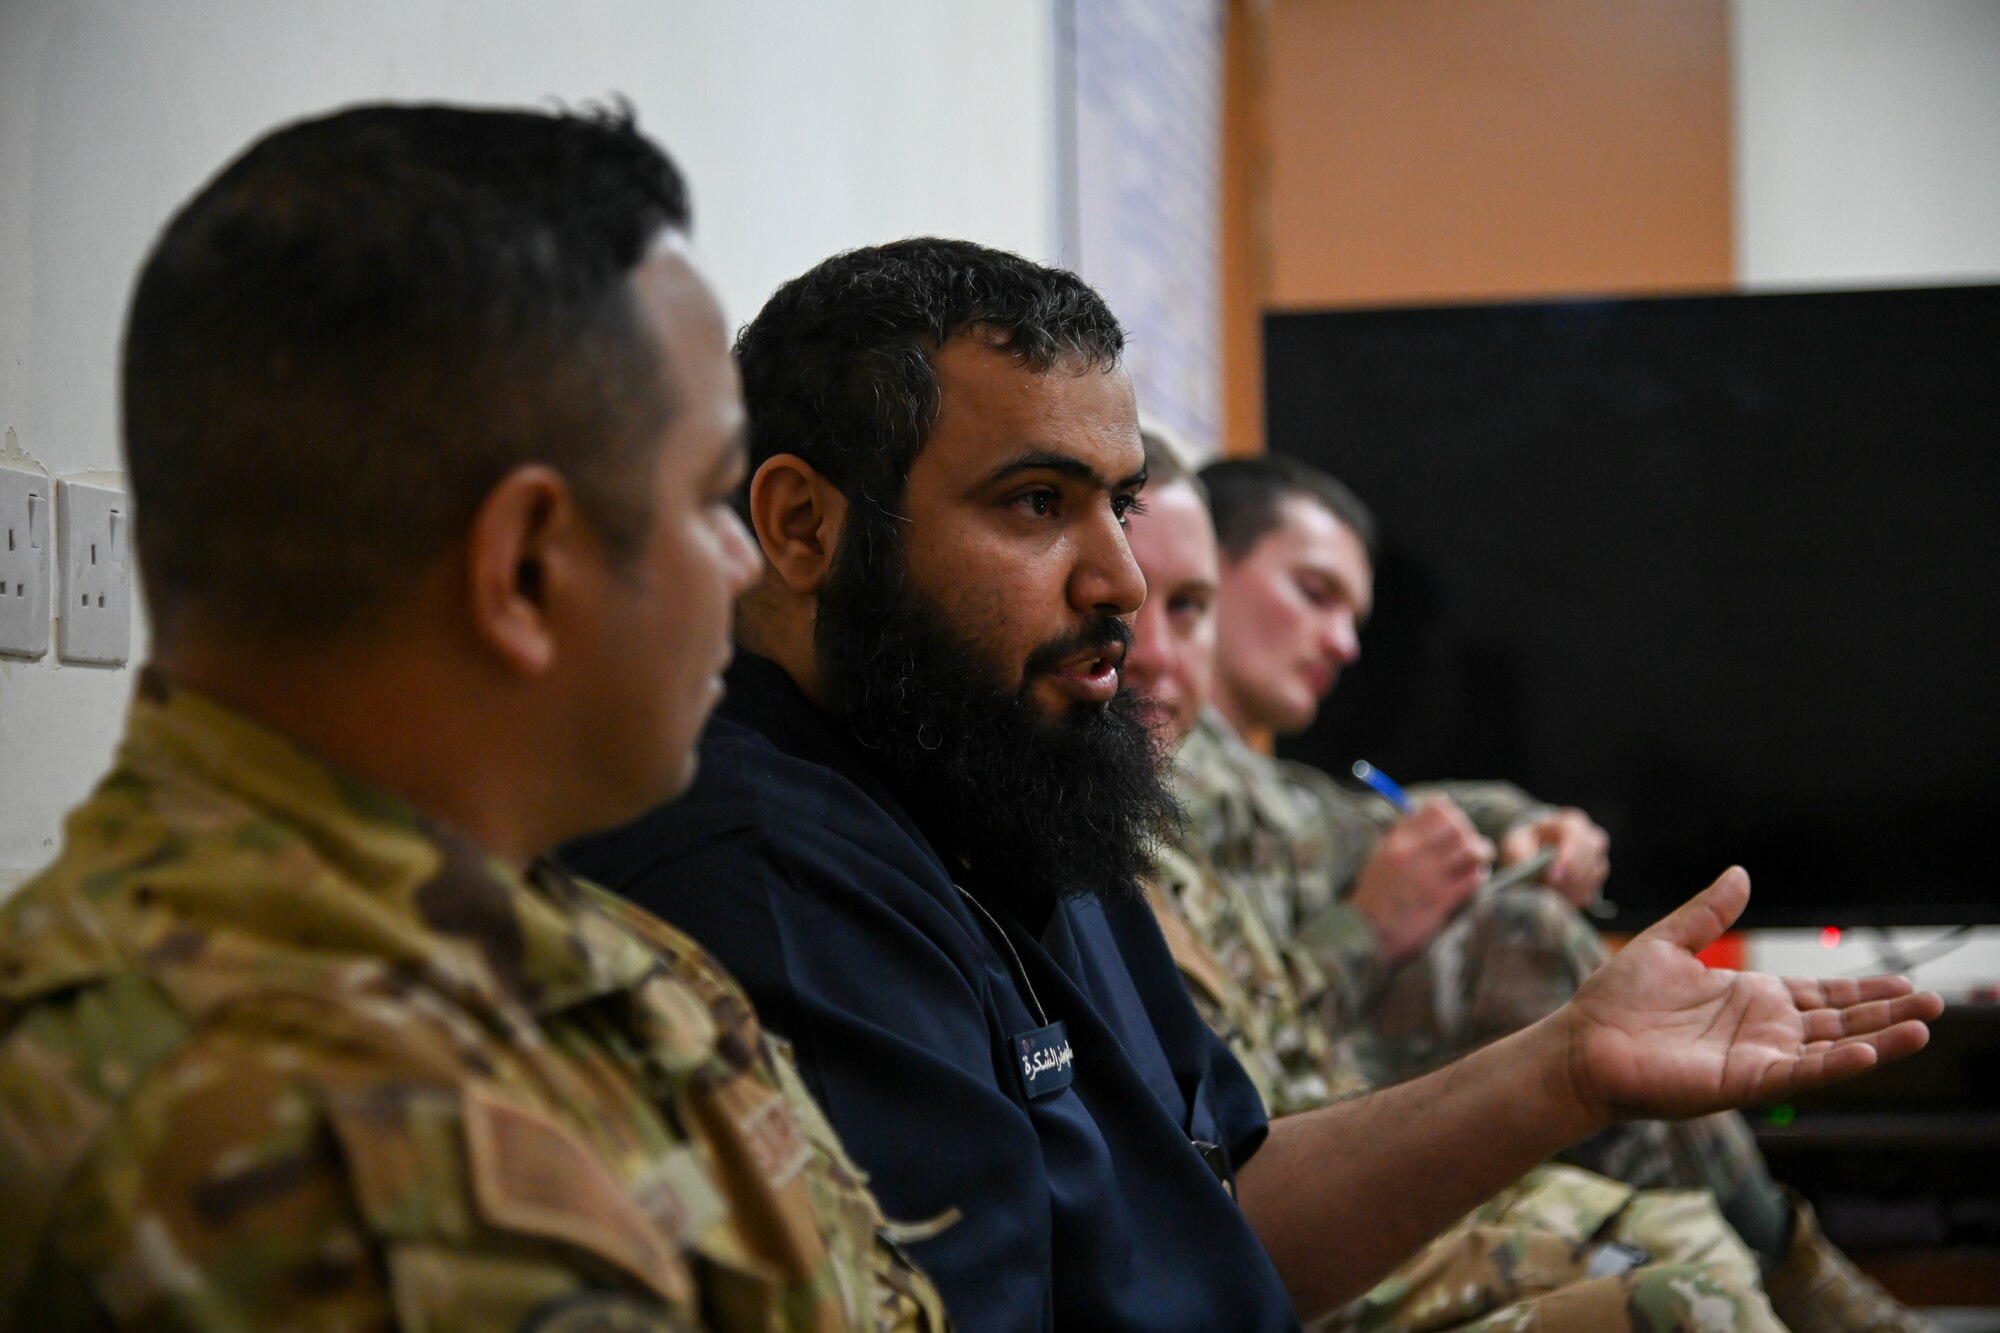 Chief Salem al Shakrh, Royal Saudi Air Force fire chief, speaks to members of the 378th Expeditionary Civil Engineer Squadron fire department during an integrated training at Prince Sultan Air Base, Kingdom of Saudi Arabia, Nov. 24, 2021. The training allowed service members the opportunity to strengthen their working relationship with their respective RSAF counterparts. (U.S. Air Force photo by Staff Sgt. Christina Graves)